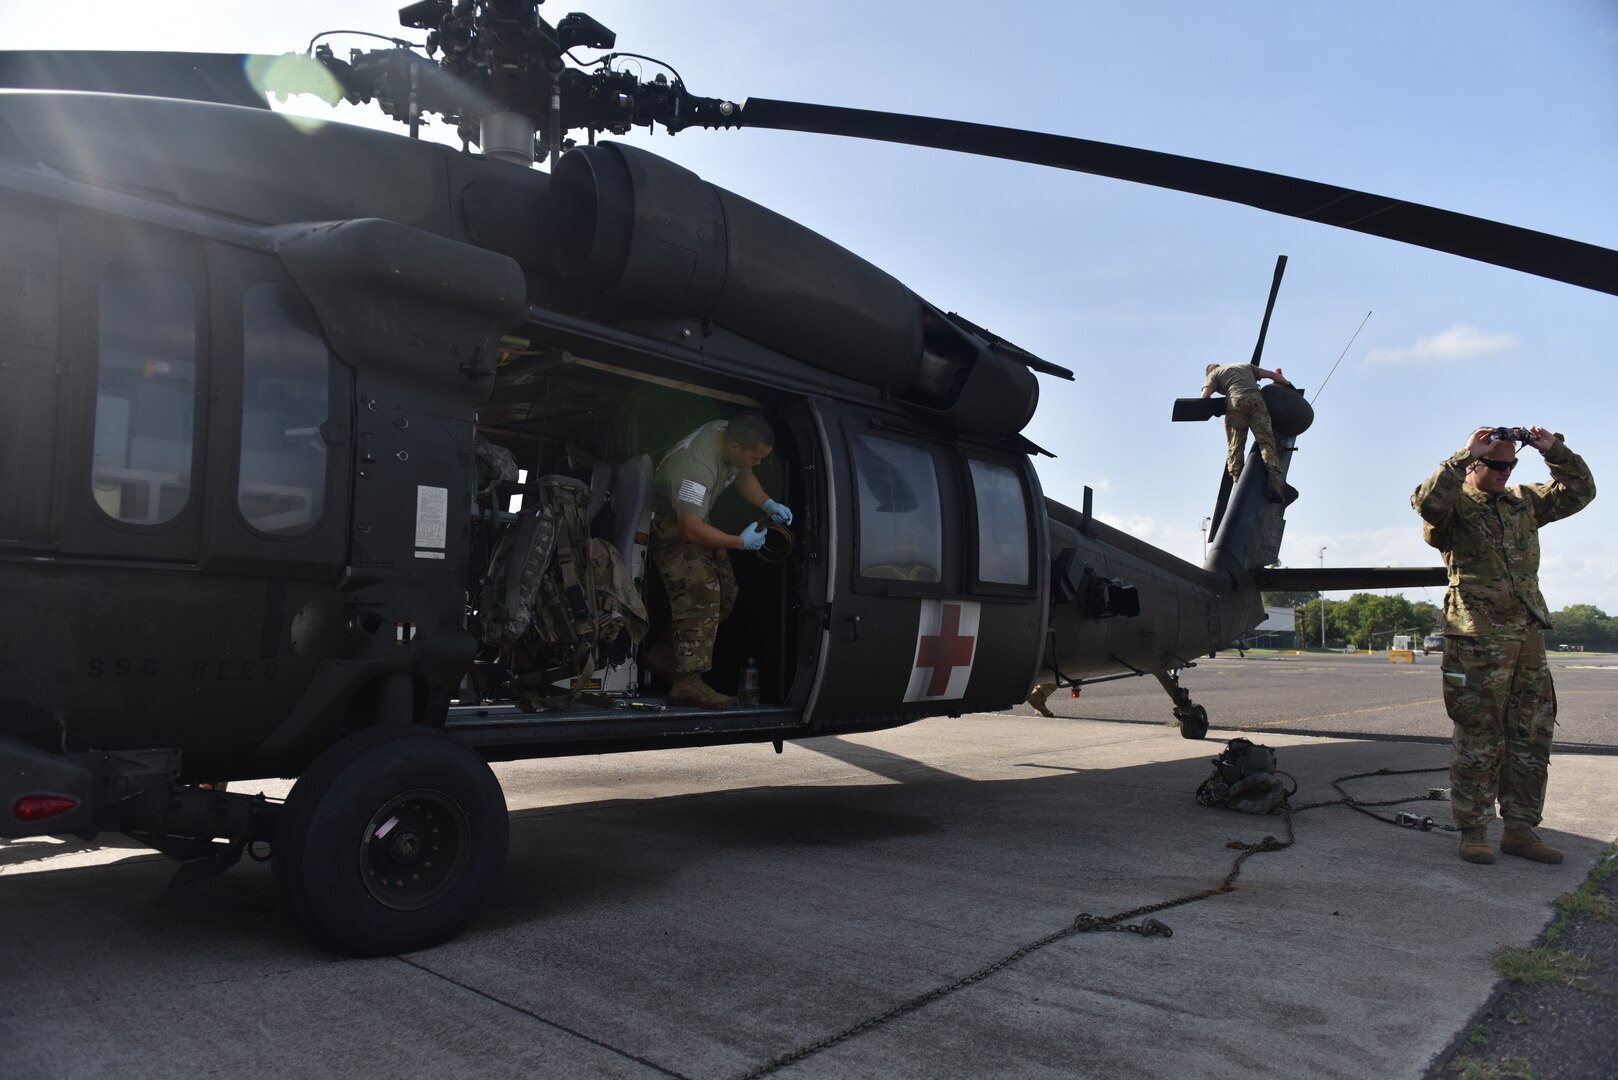 U.S. Army aircrew, assigned to the 1st Battalion 228th Aviation Regiment Air Ambulance Detachment at Joint Task Force-Bravo, conduct an aircraft maintenance inspection at Soto Cano Air Base, Honduras July 31, 2020. The Charlie Company of the 1-228th have been vital in providing emergency medical transportation throughout Honduras. Members of the 1-228th performed three life-saving aeromedical evacuations in the course of four weeks.